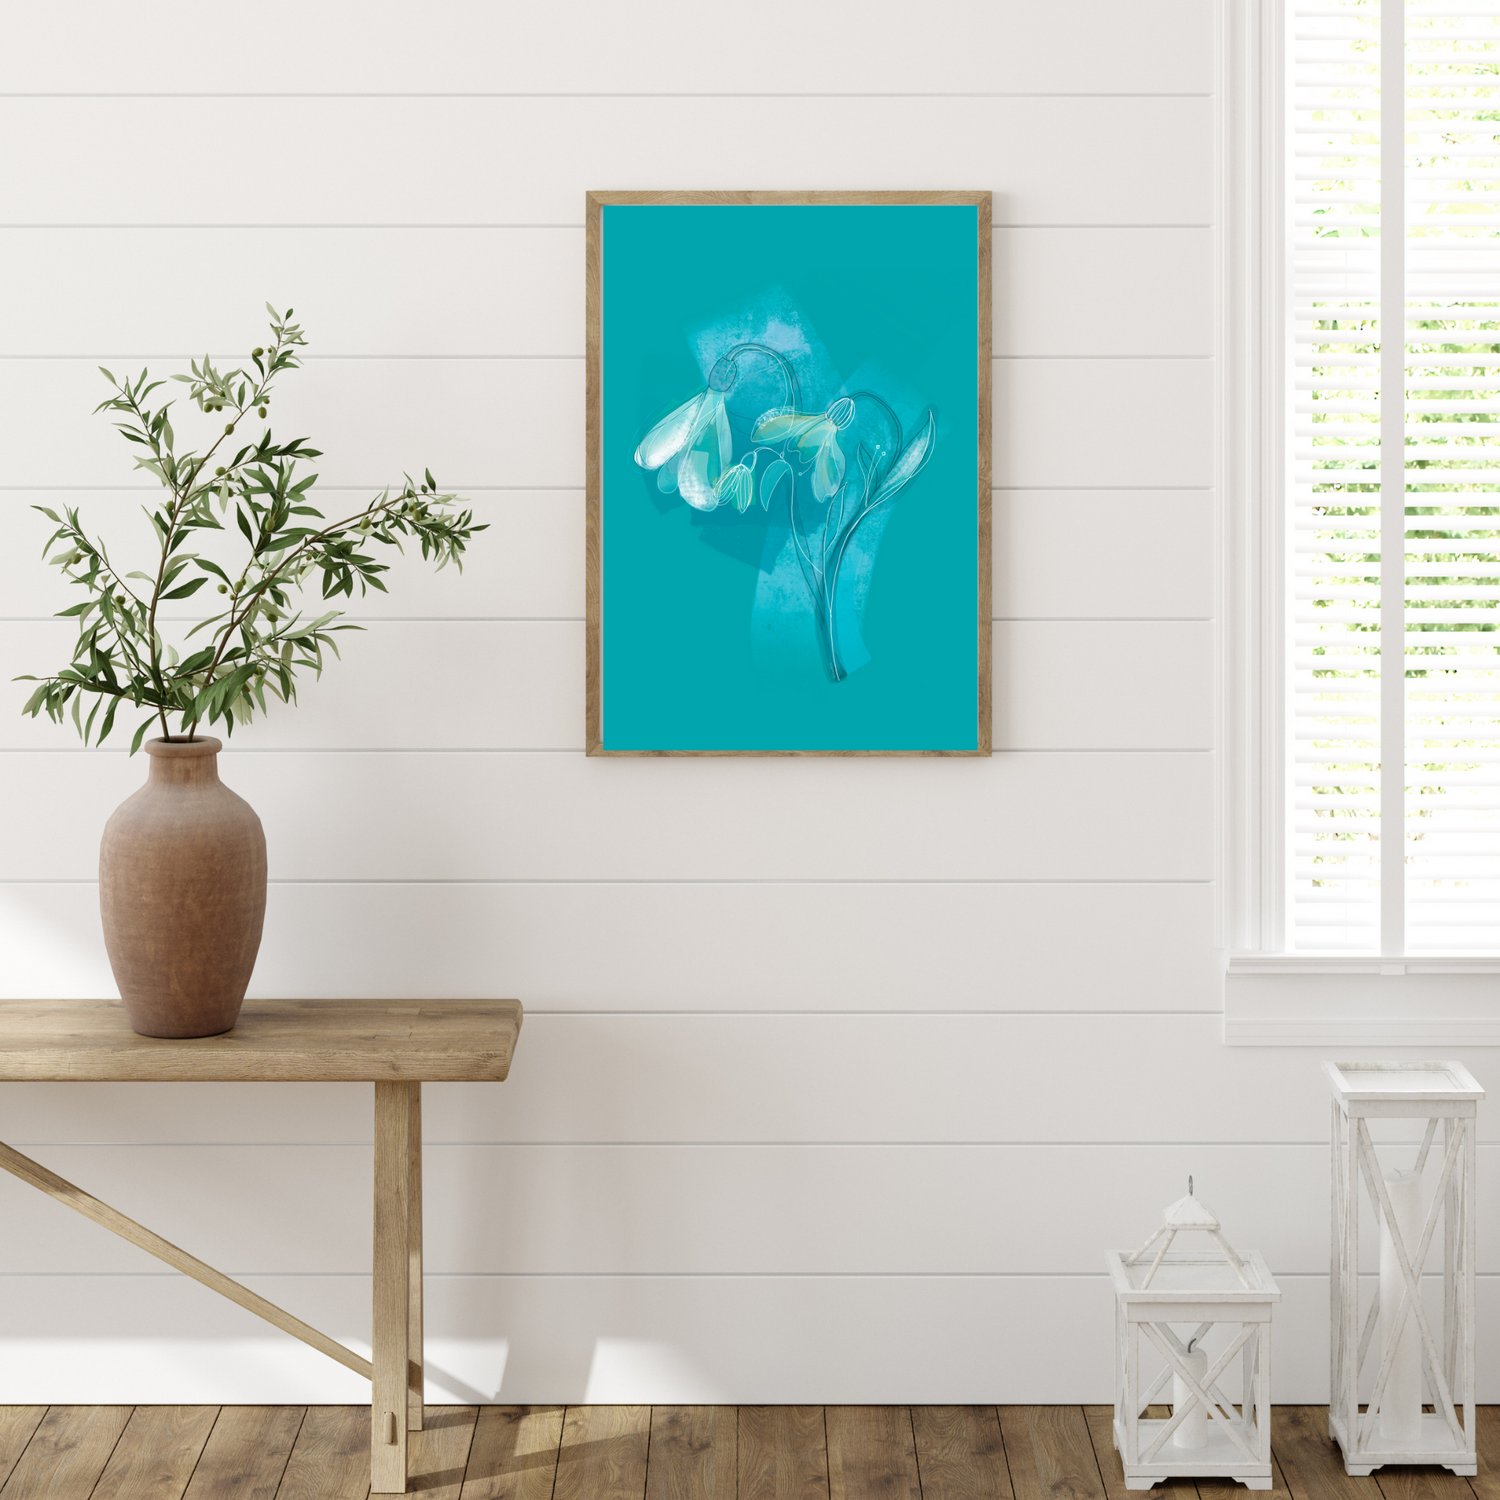 An example of the Snowdrop painting by ArisaTeam in a room